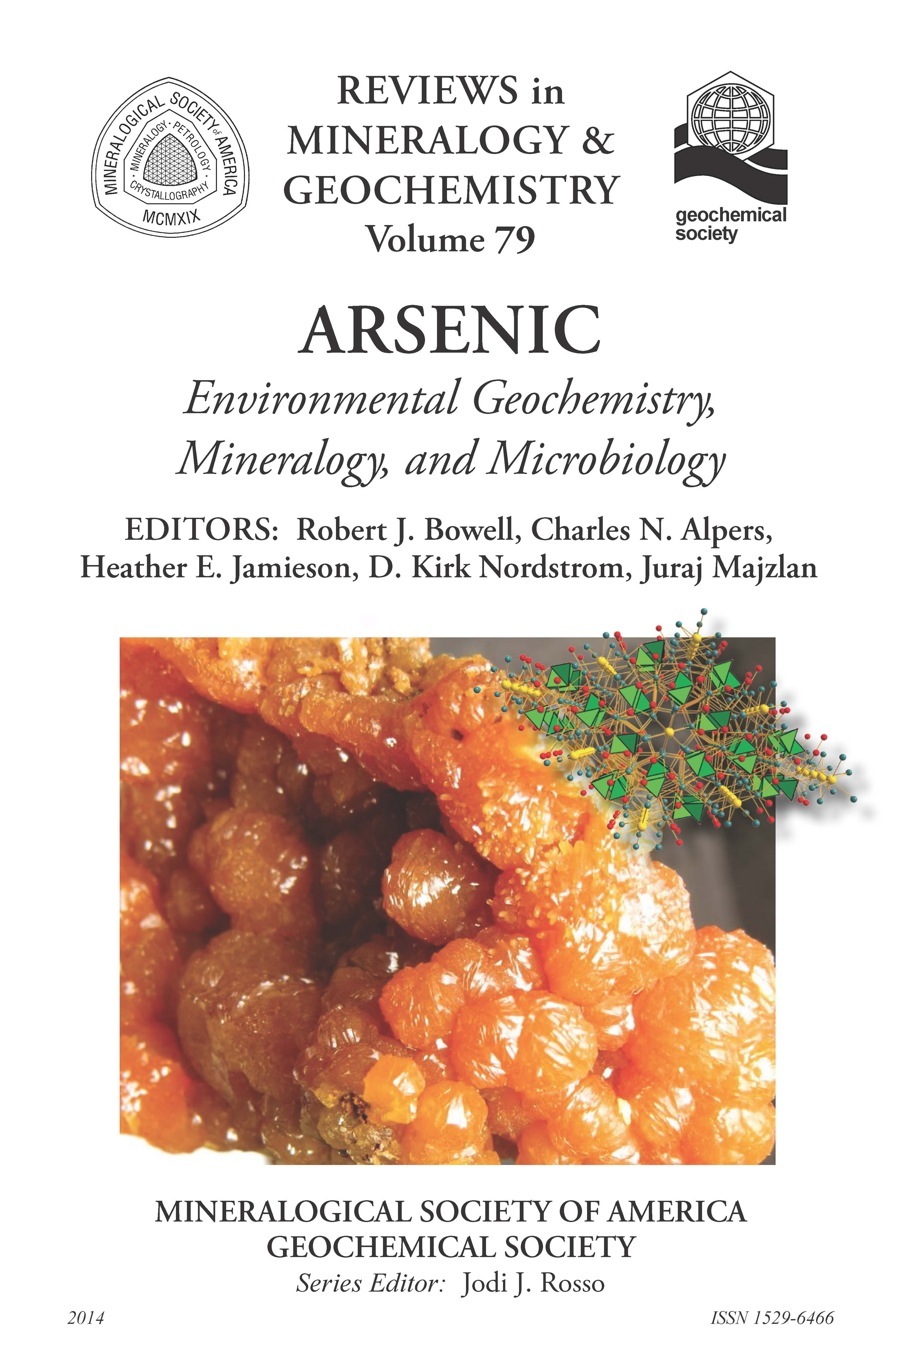 Front Cover of Reviews in Mineralogy and Geochmistry vol 79